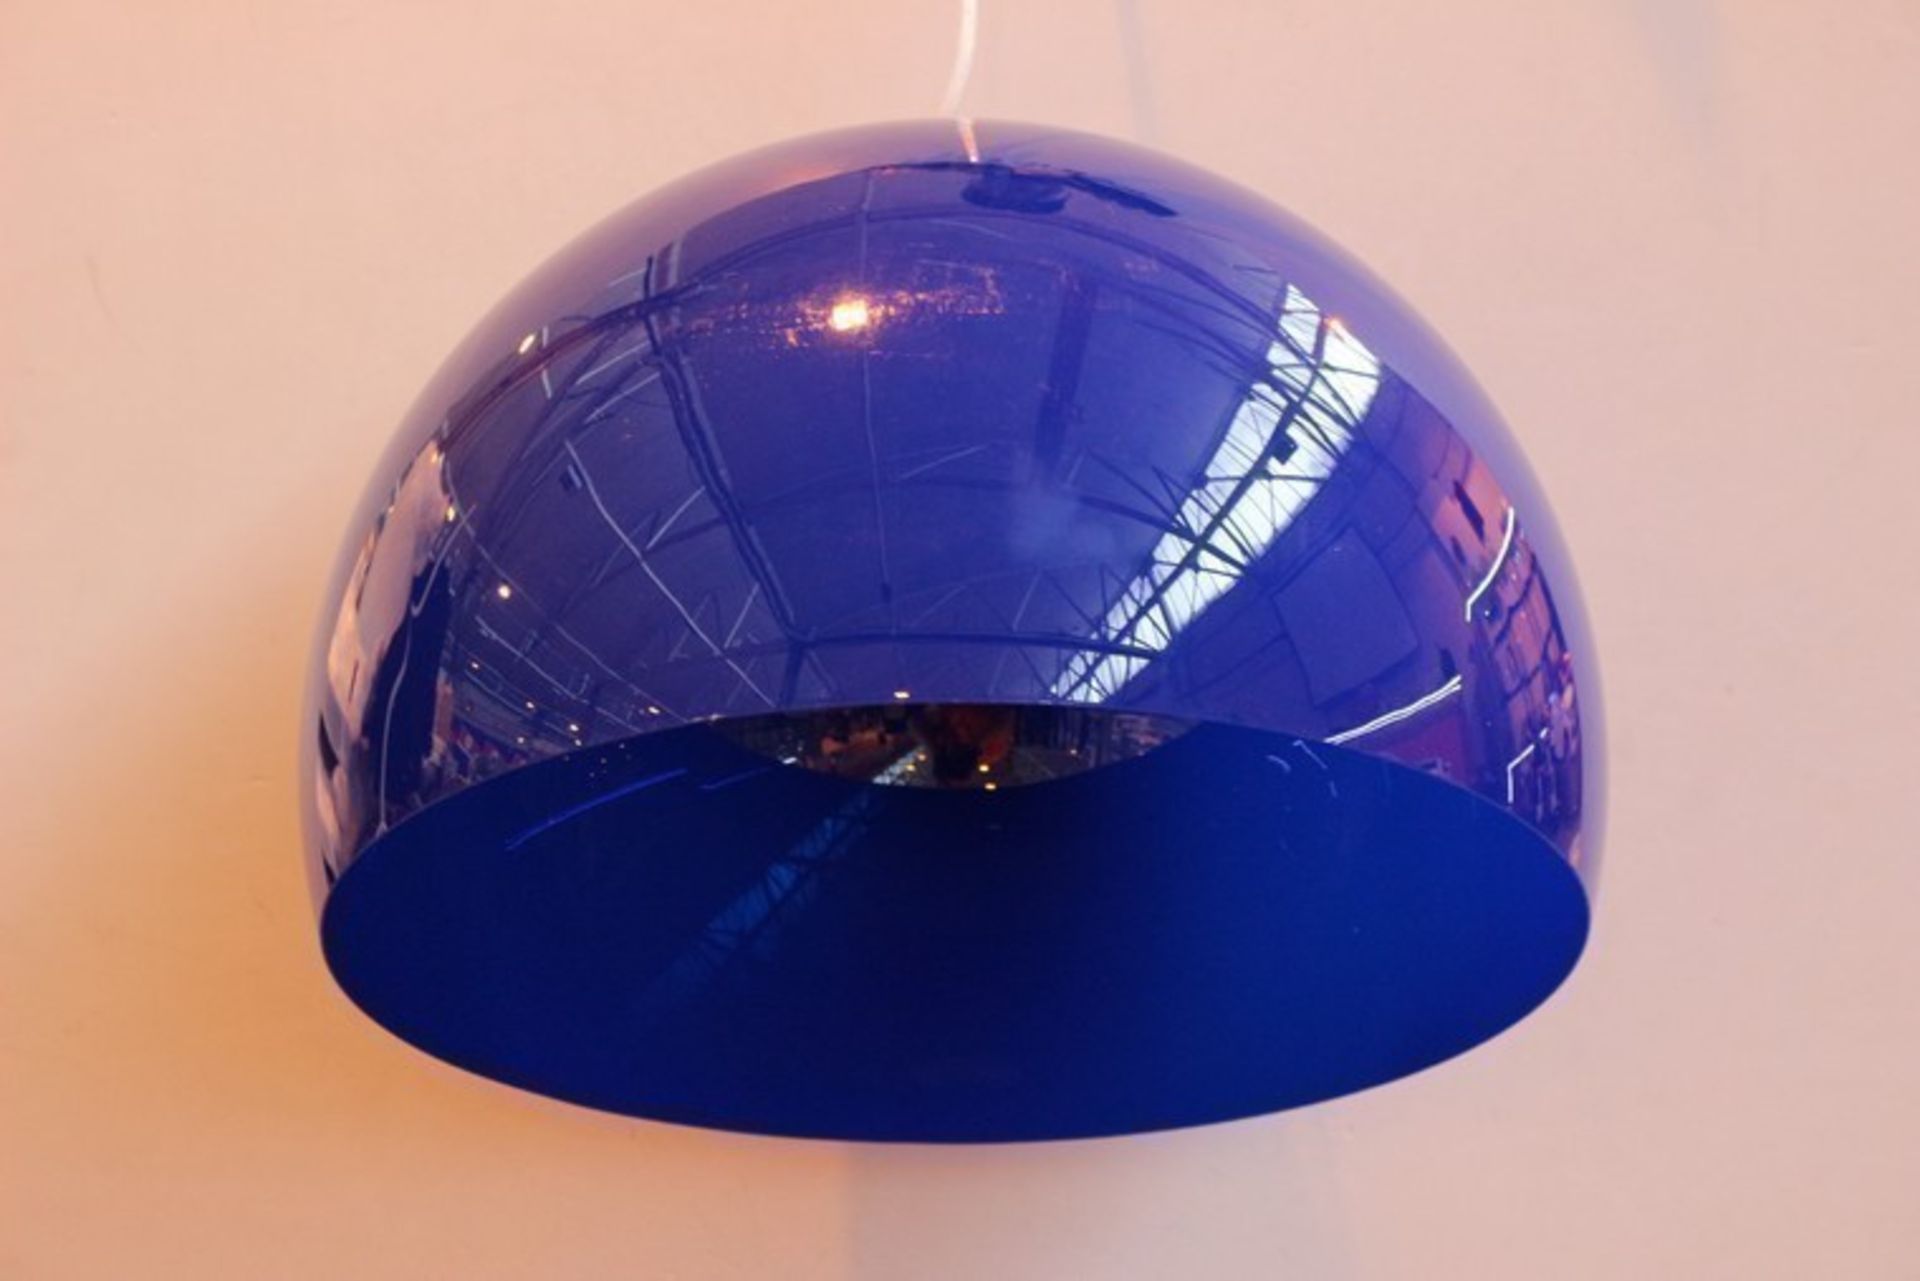 1 x FLY STYLE PENDANT CEILING LIGHT IN BLUE (010-L) *PLEASE NOTE THAT THE BID PRICE IS MULTIPLIED BY